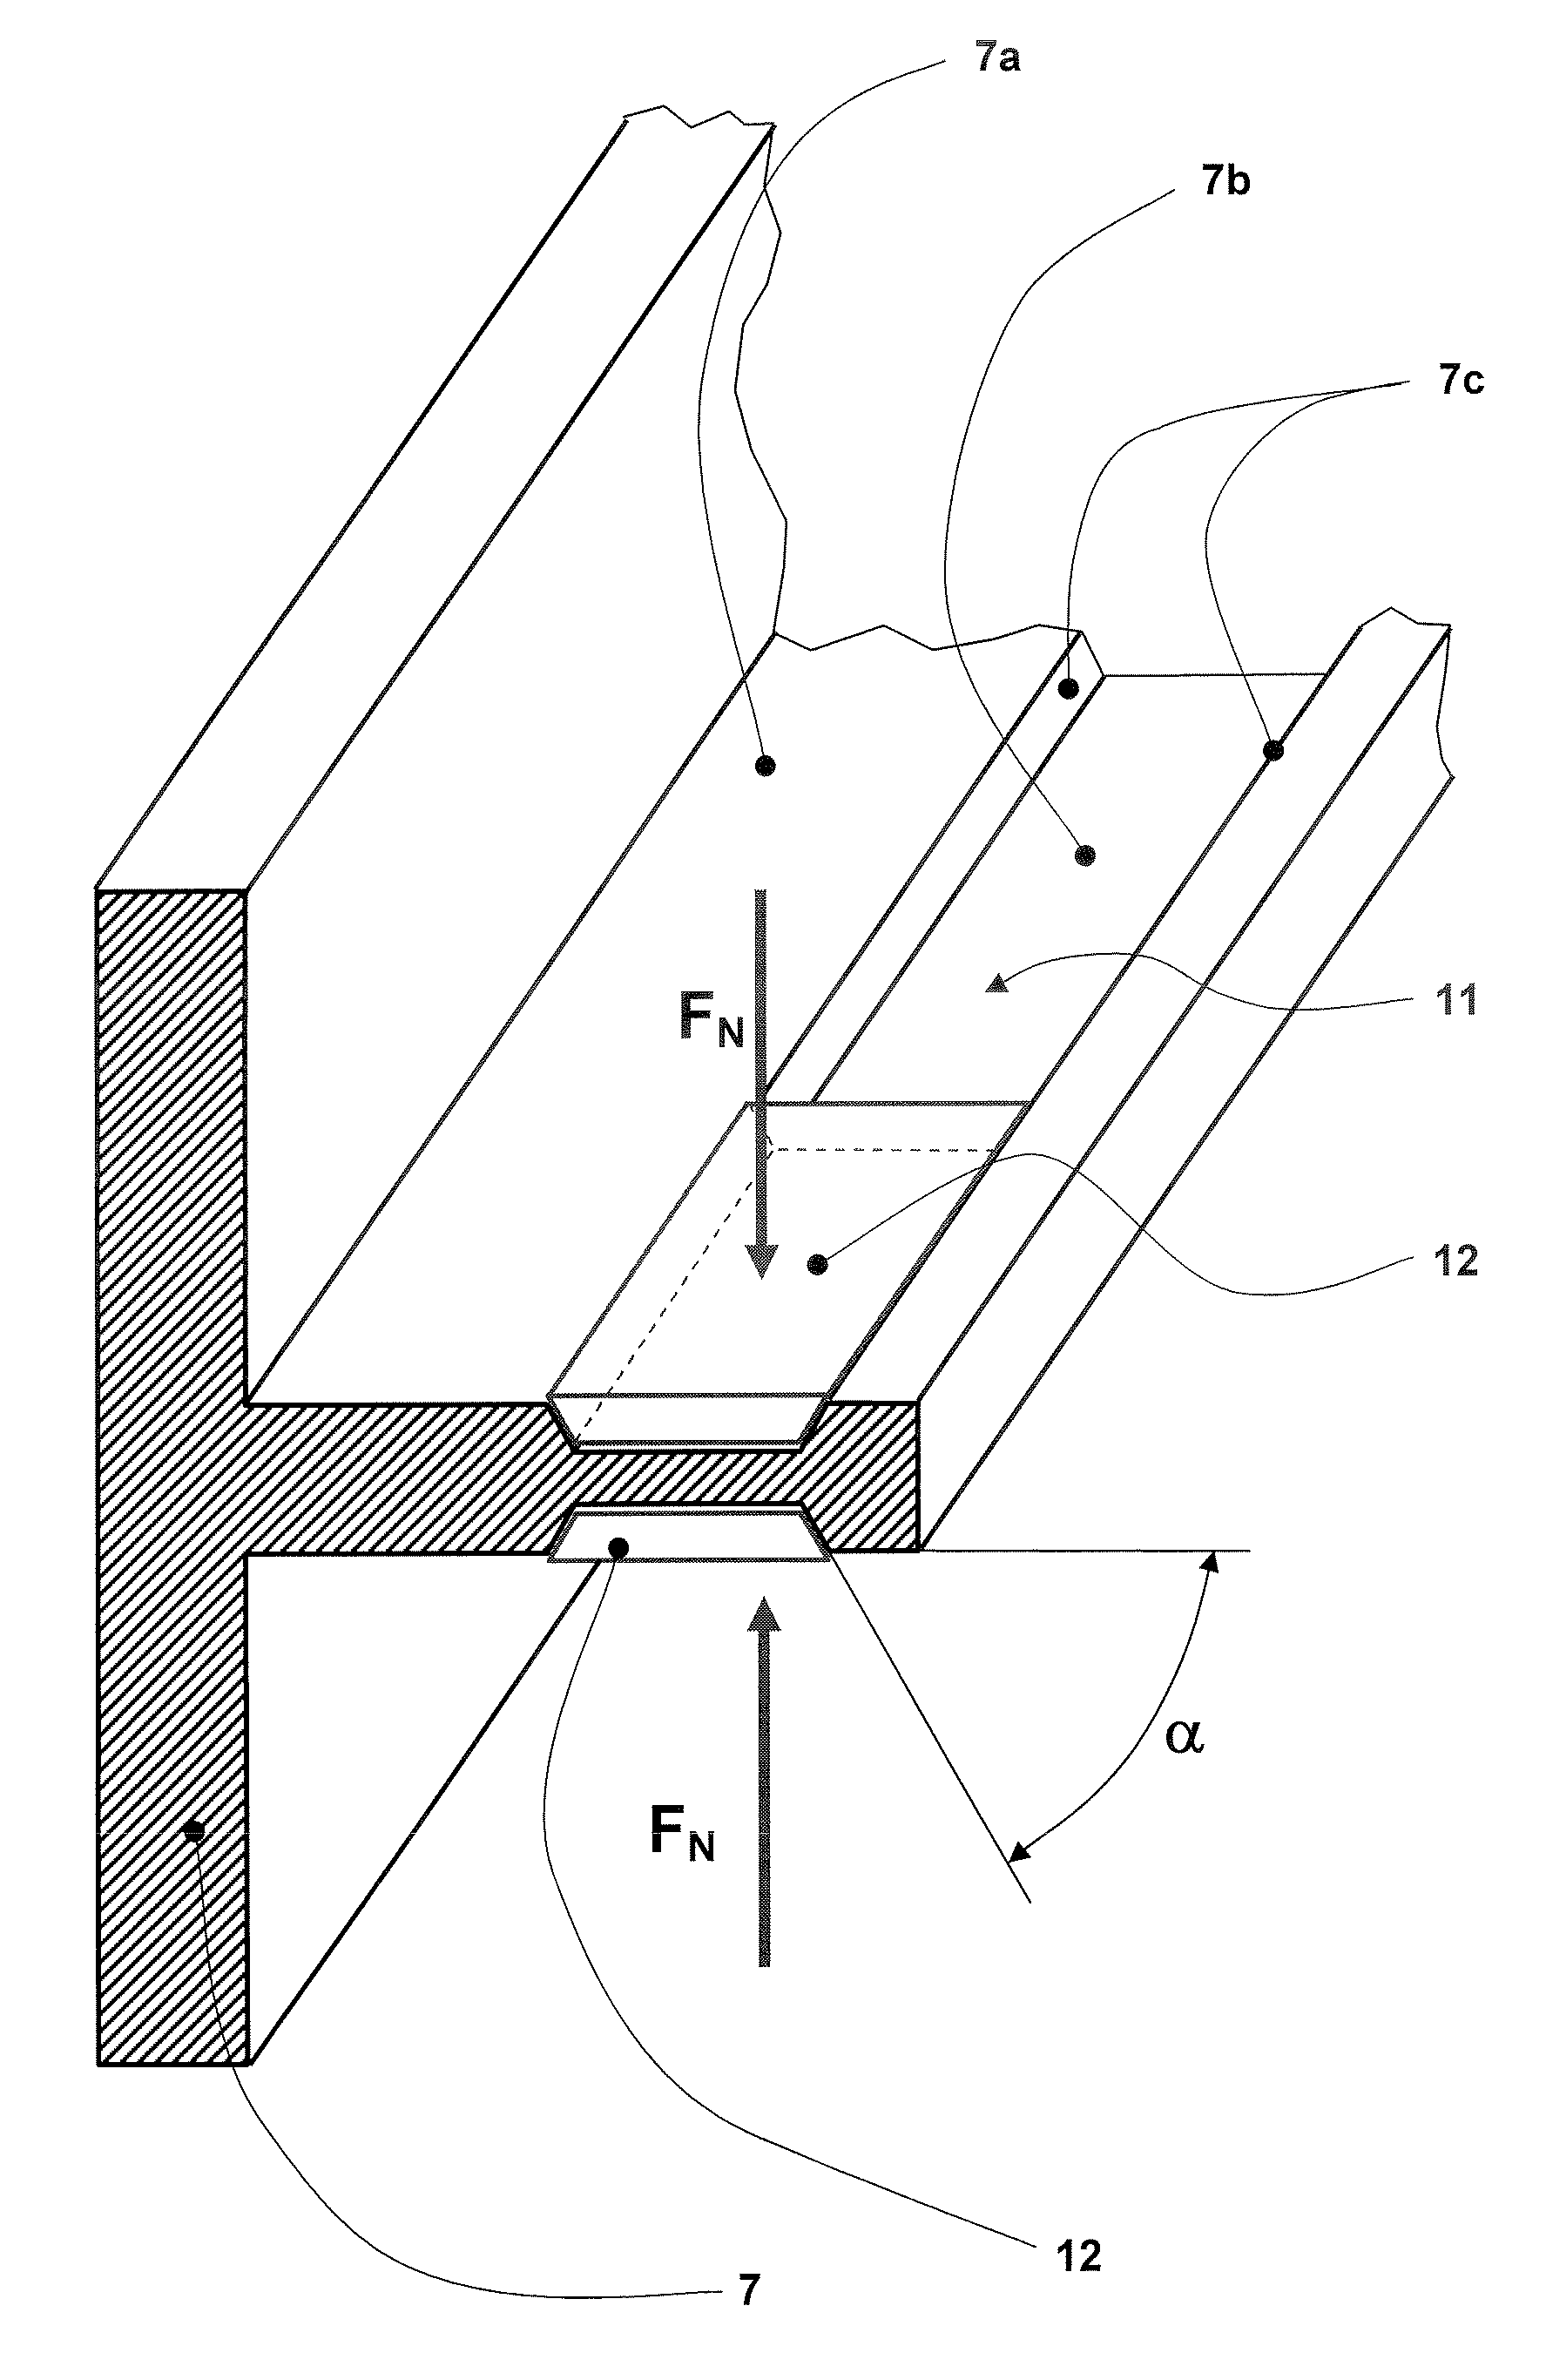 Elevator installation, a guide rail of an elevator installation, brake equipment of an elevator installation and a method for guiding, holding and braking an elevator installation